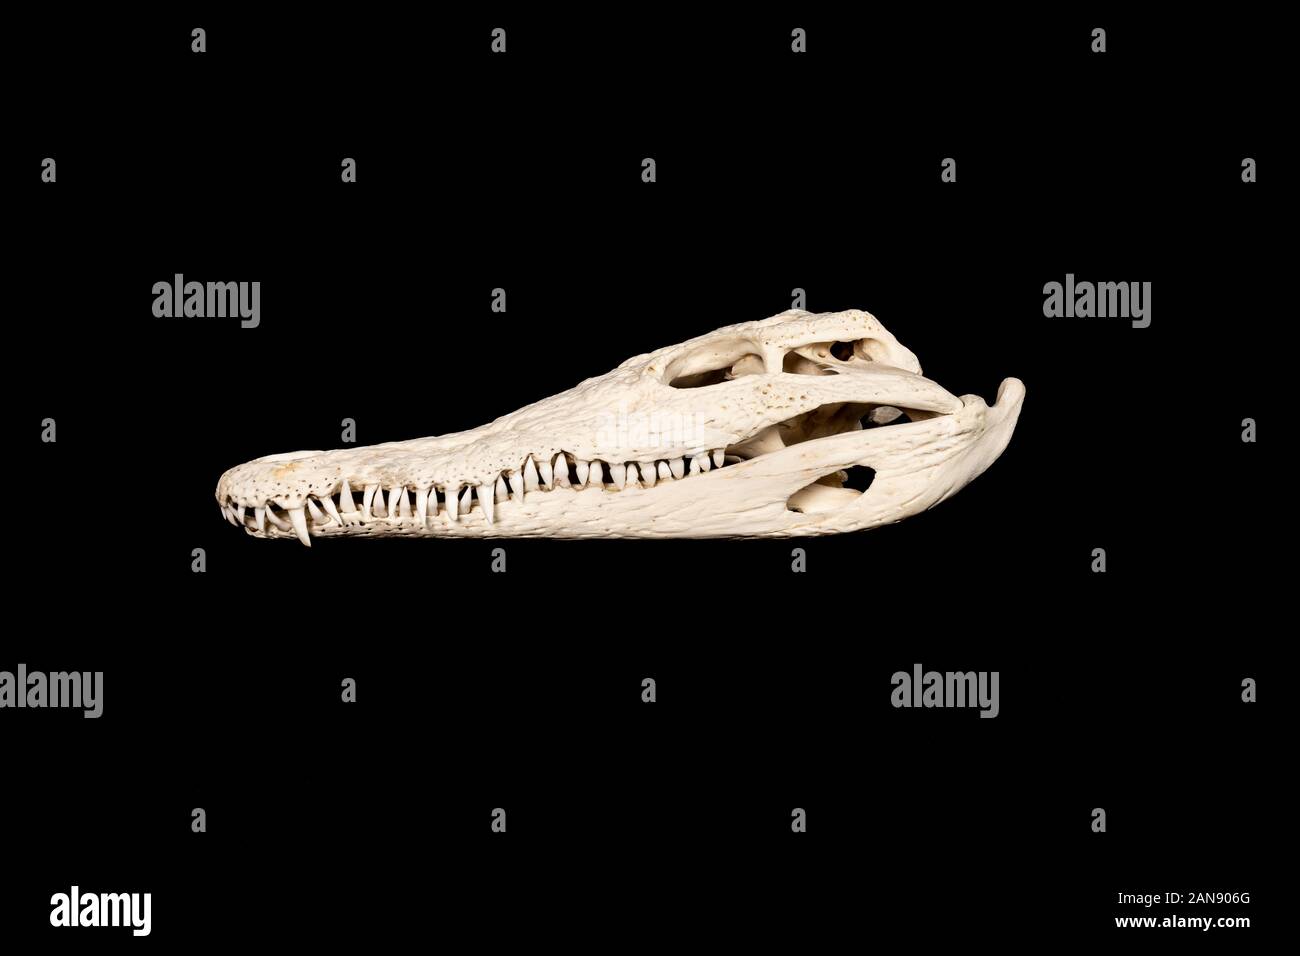 skull of a nile crocodile - crocodylus niloticus viewed from the left side on a black background Stock Photo